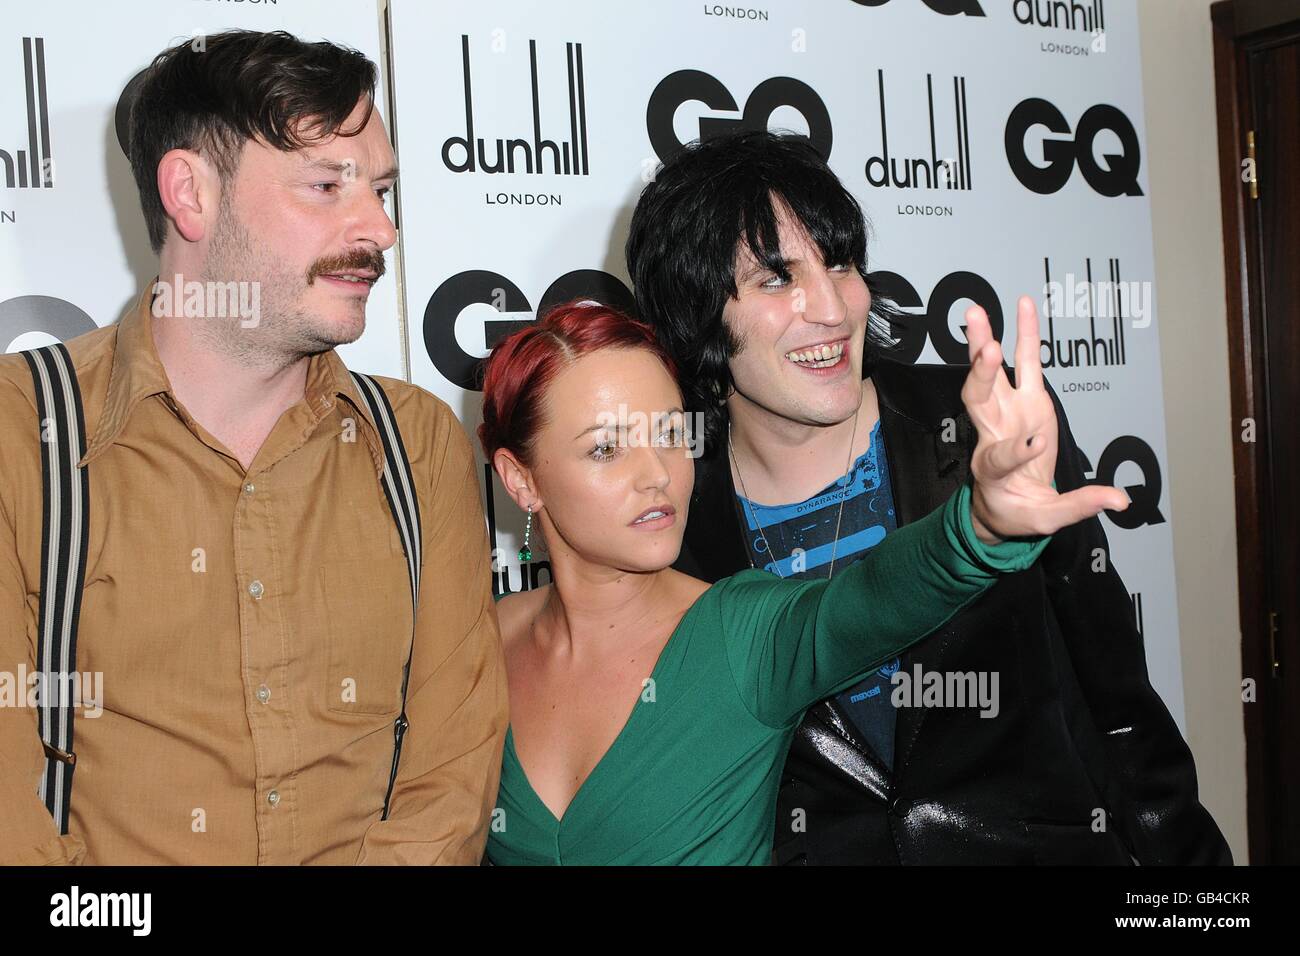 The Mighty Boosh members Noel Fielding (r) and Julian Barratt pose with Jaime Winstone and the award for best comedy at the GQ Men of the Year Awards 2008, Royal Opera House, Covent Garden, London. Stock Photo